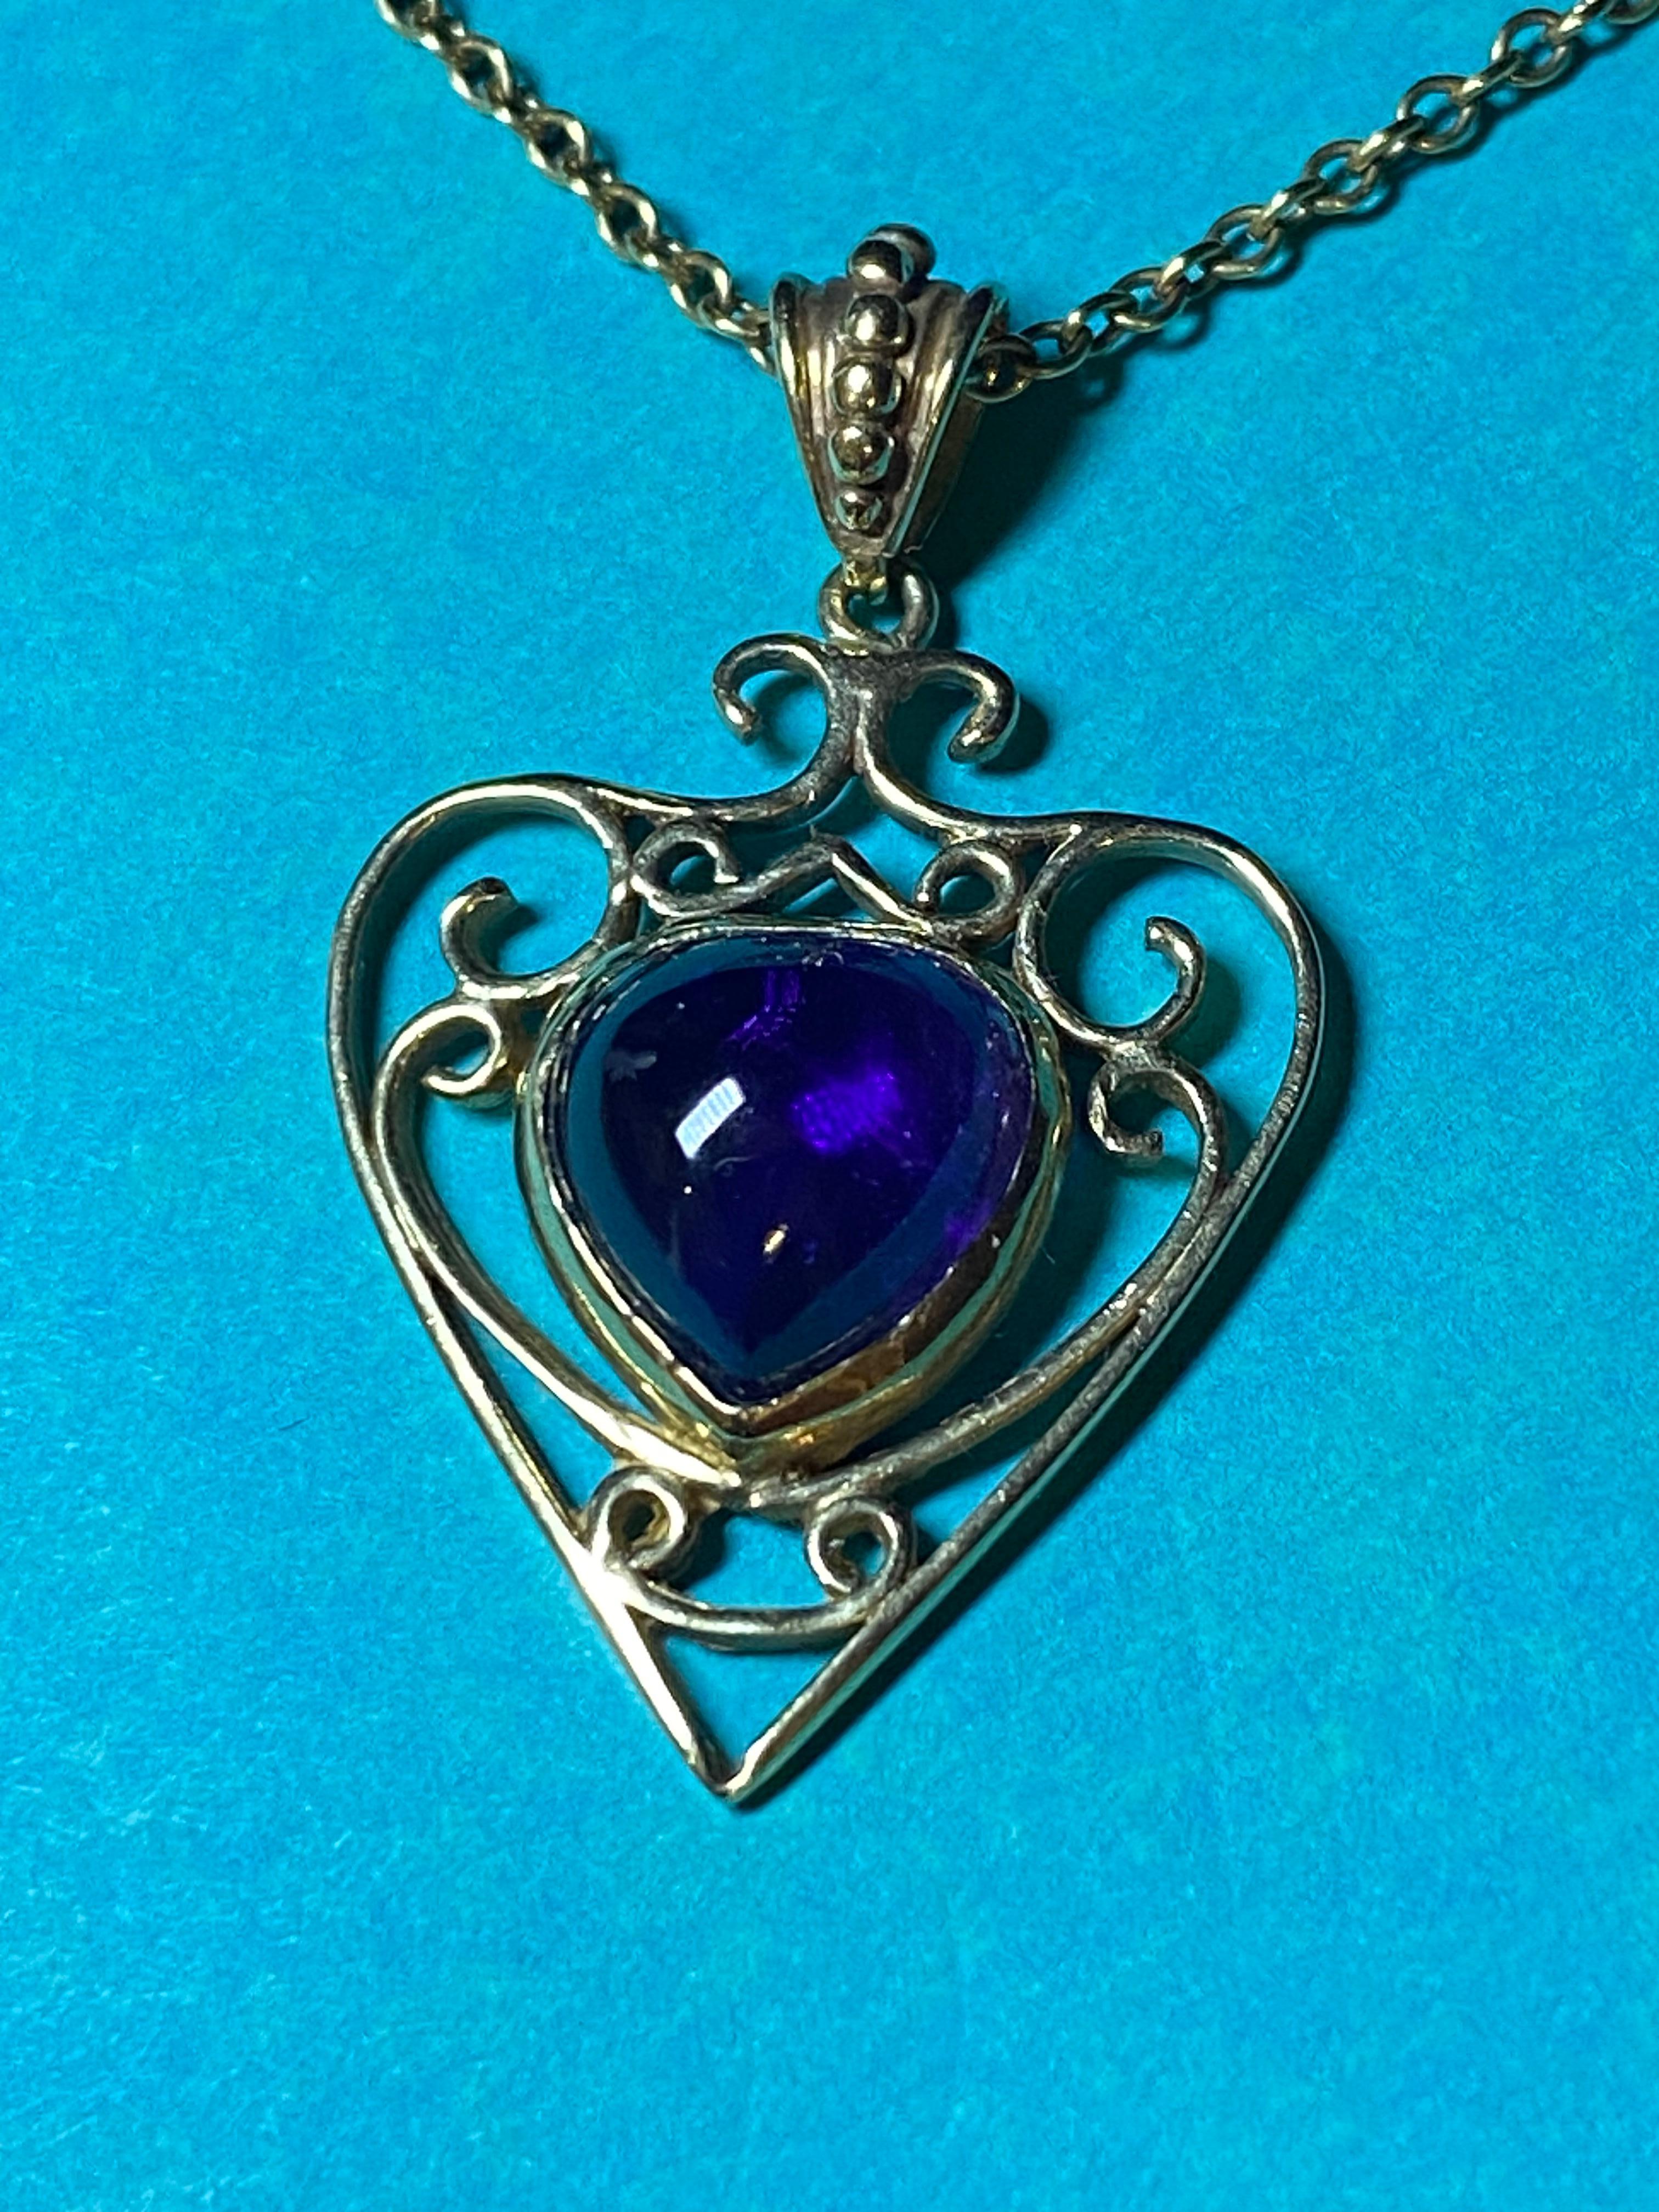 Amethyst Heart-Shaped (Spade) Renaissance Style Pendant 
is a striking piece of Italian Retro jewelry 

~~~~~~

Featuring a heart-shaped cabochon Natural Amethyst, 
bezel set within an intricate filigree setting 

Of estimated weight over 4.00ct,